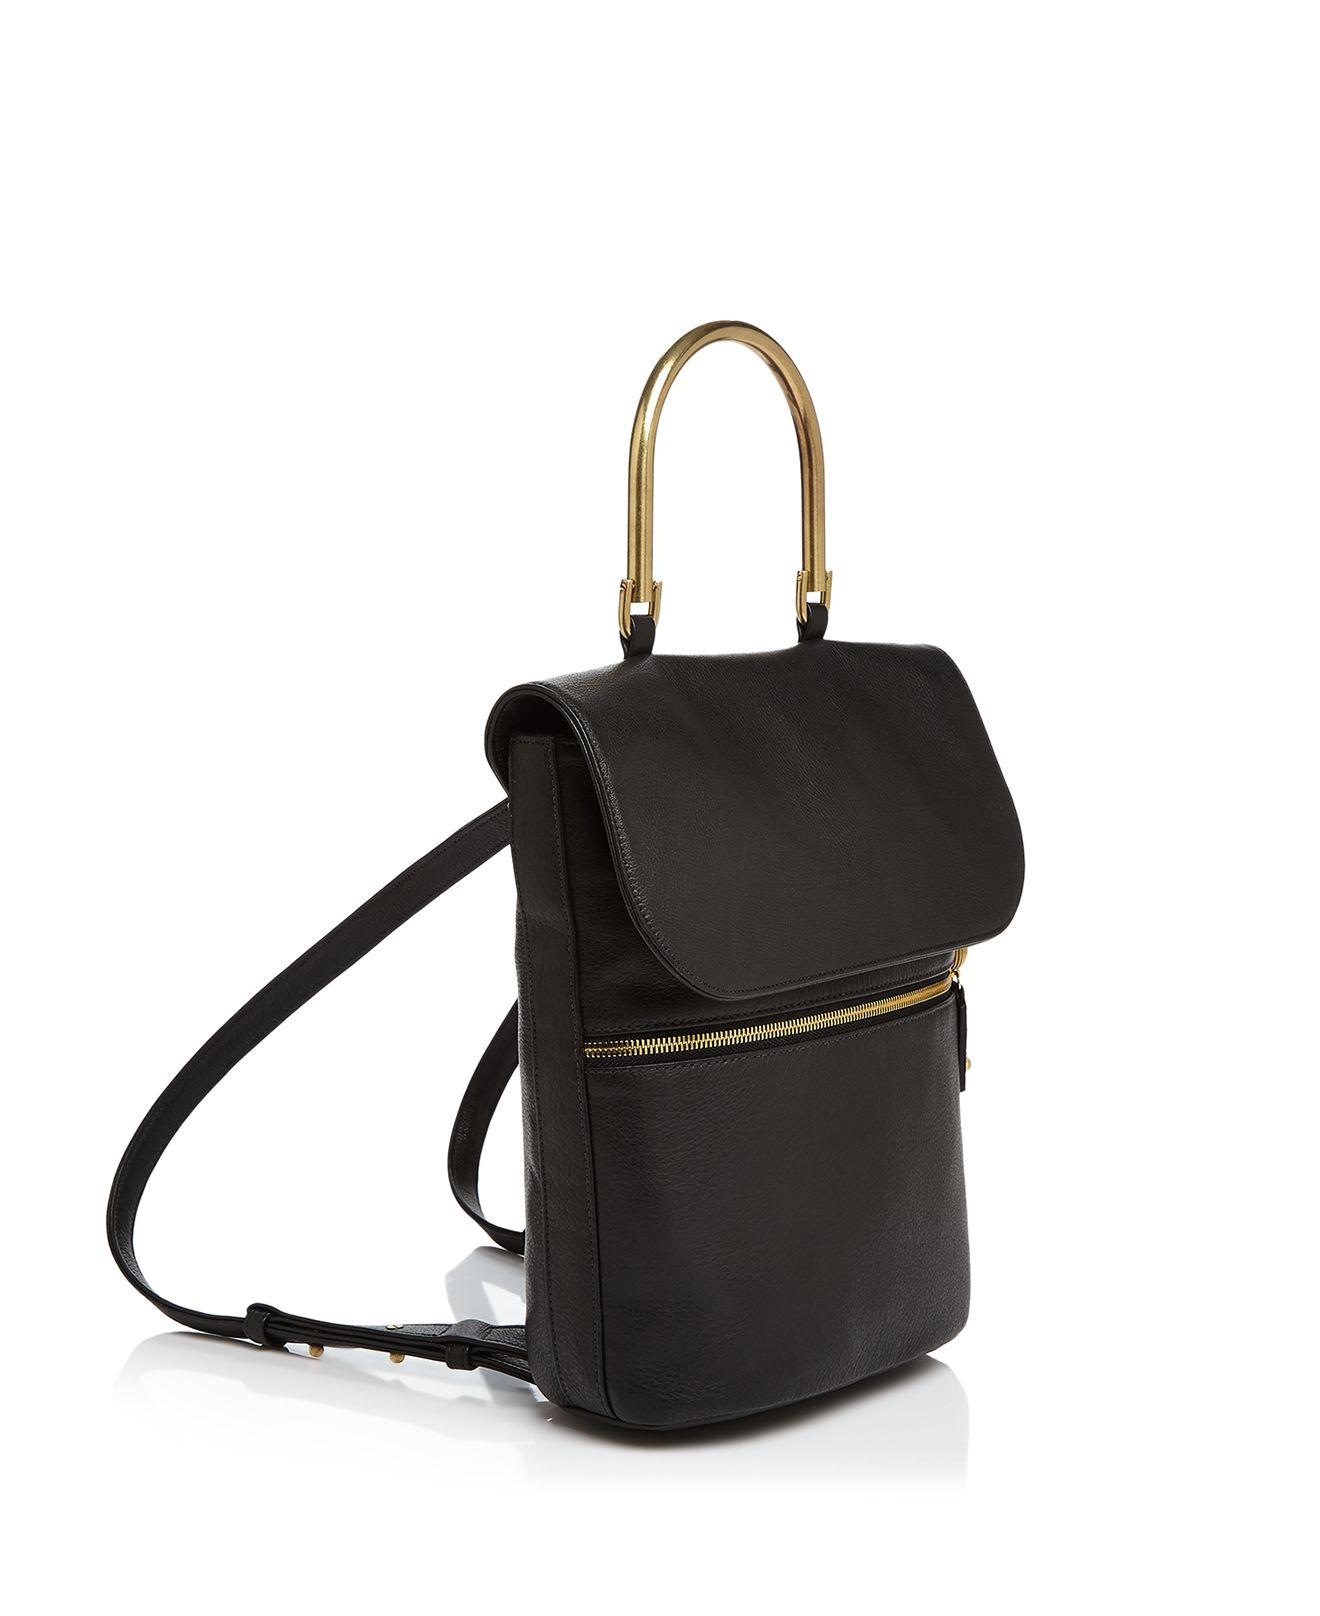 SJP by Sarah Jessica Parker Oath Leather Backpack in Black - Lyst